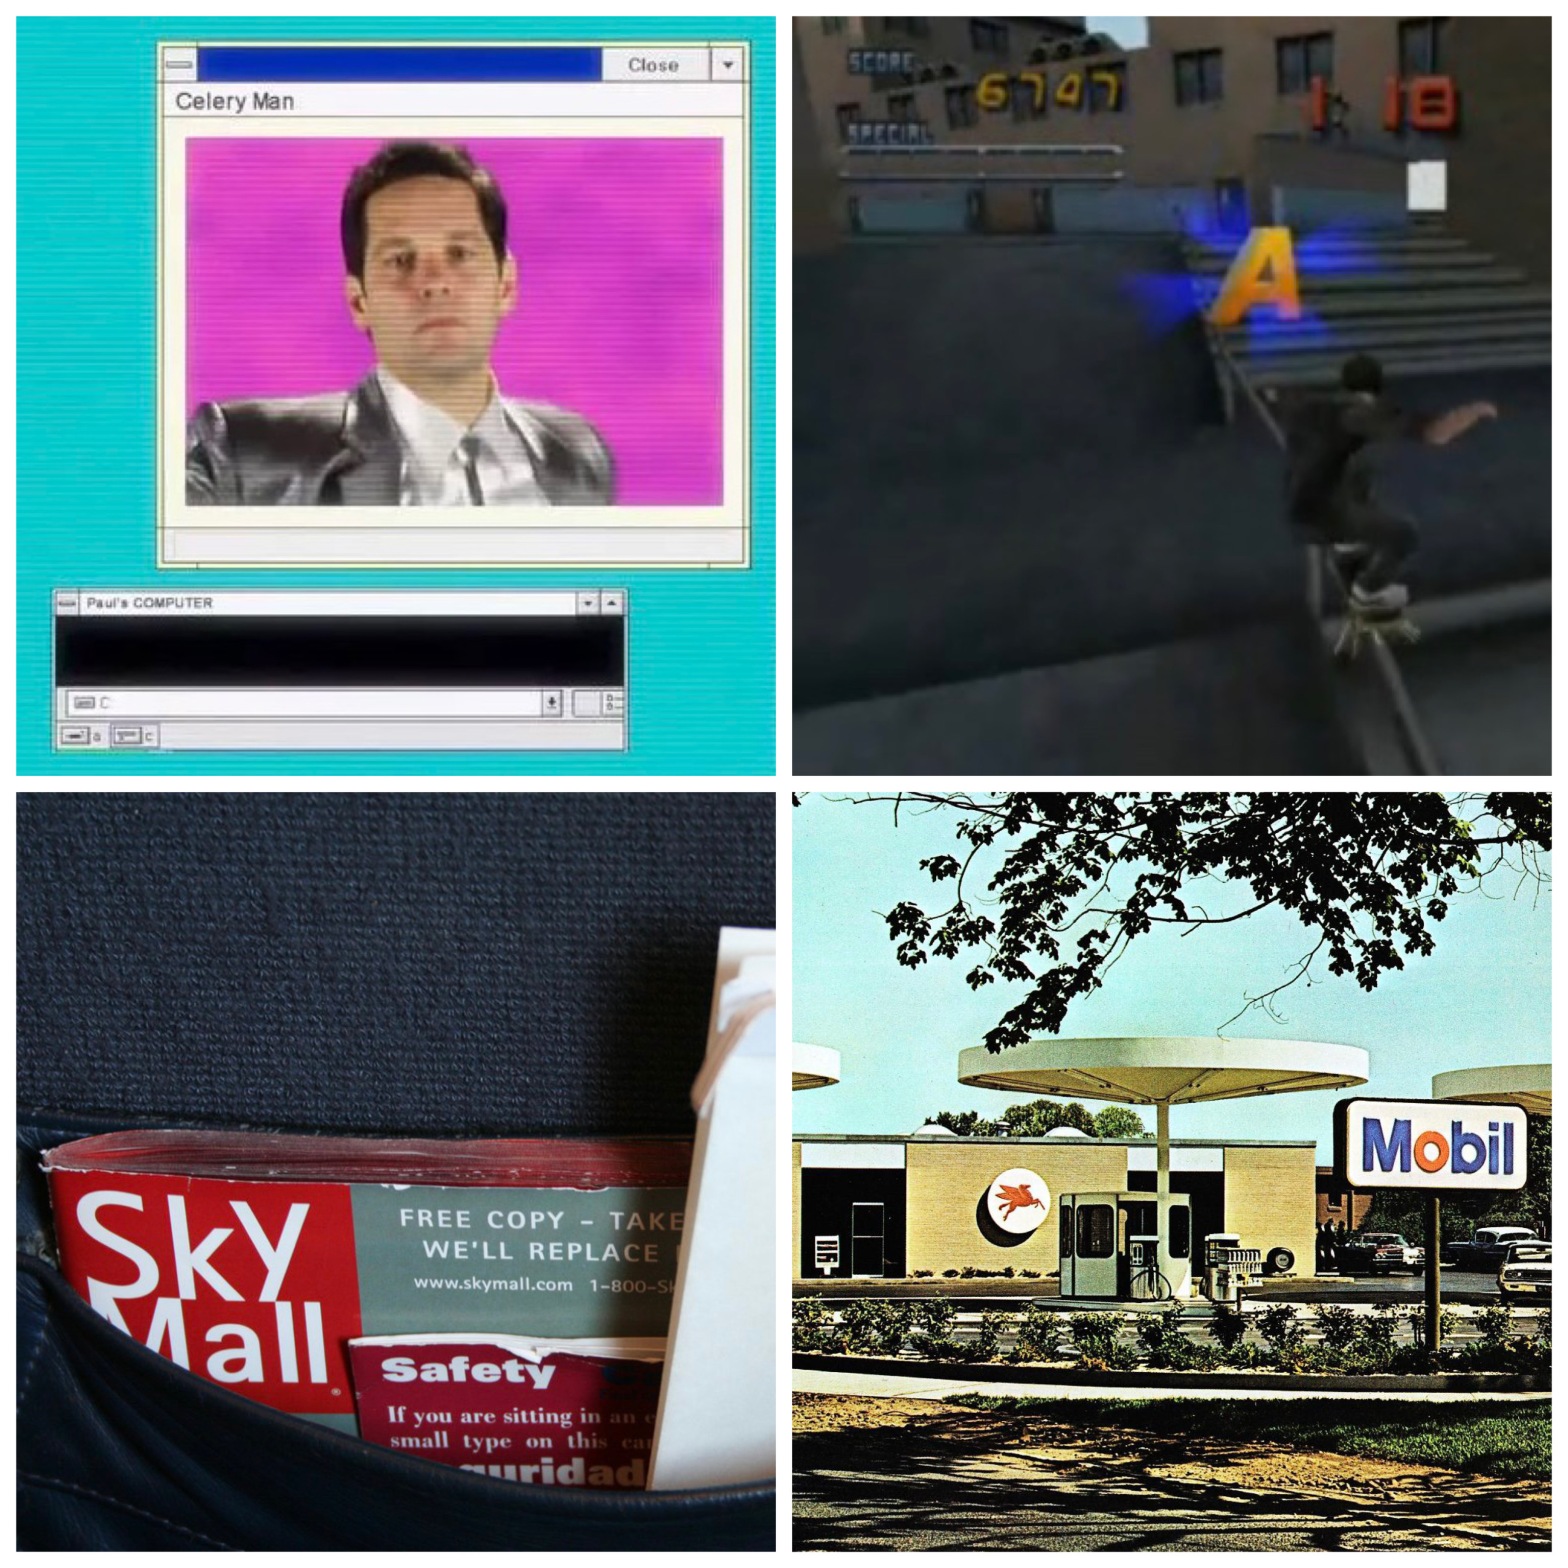 Paul Rudd as Celery Man, collecting S-K-A-T-E in Tony Hawk's Pro Skater, Sky Mall, and a Mobil gas station.